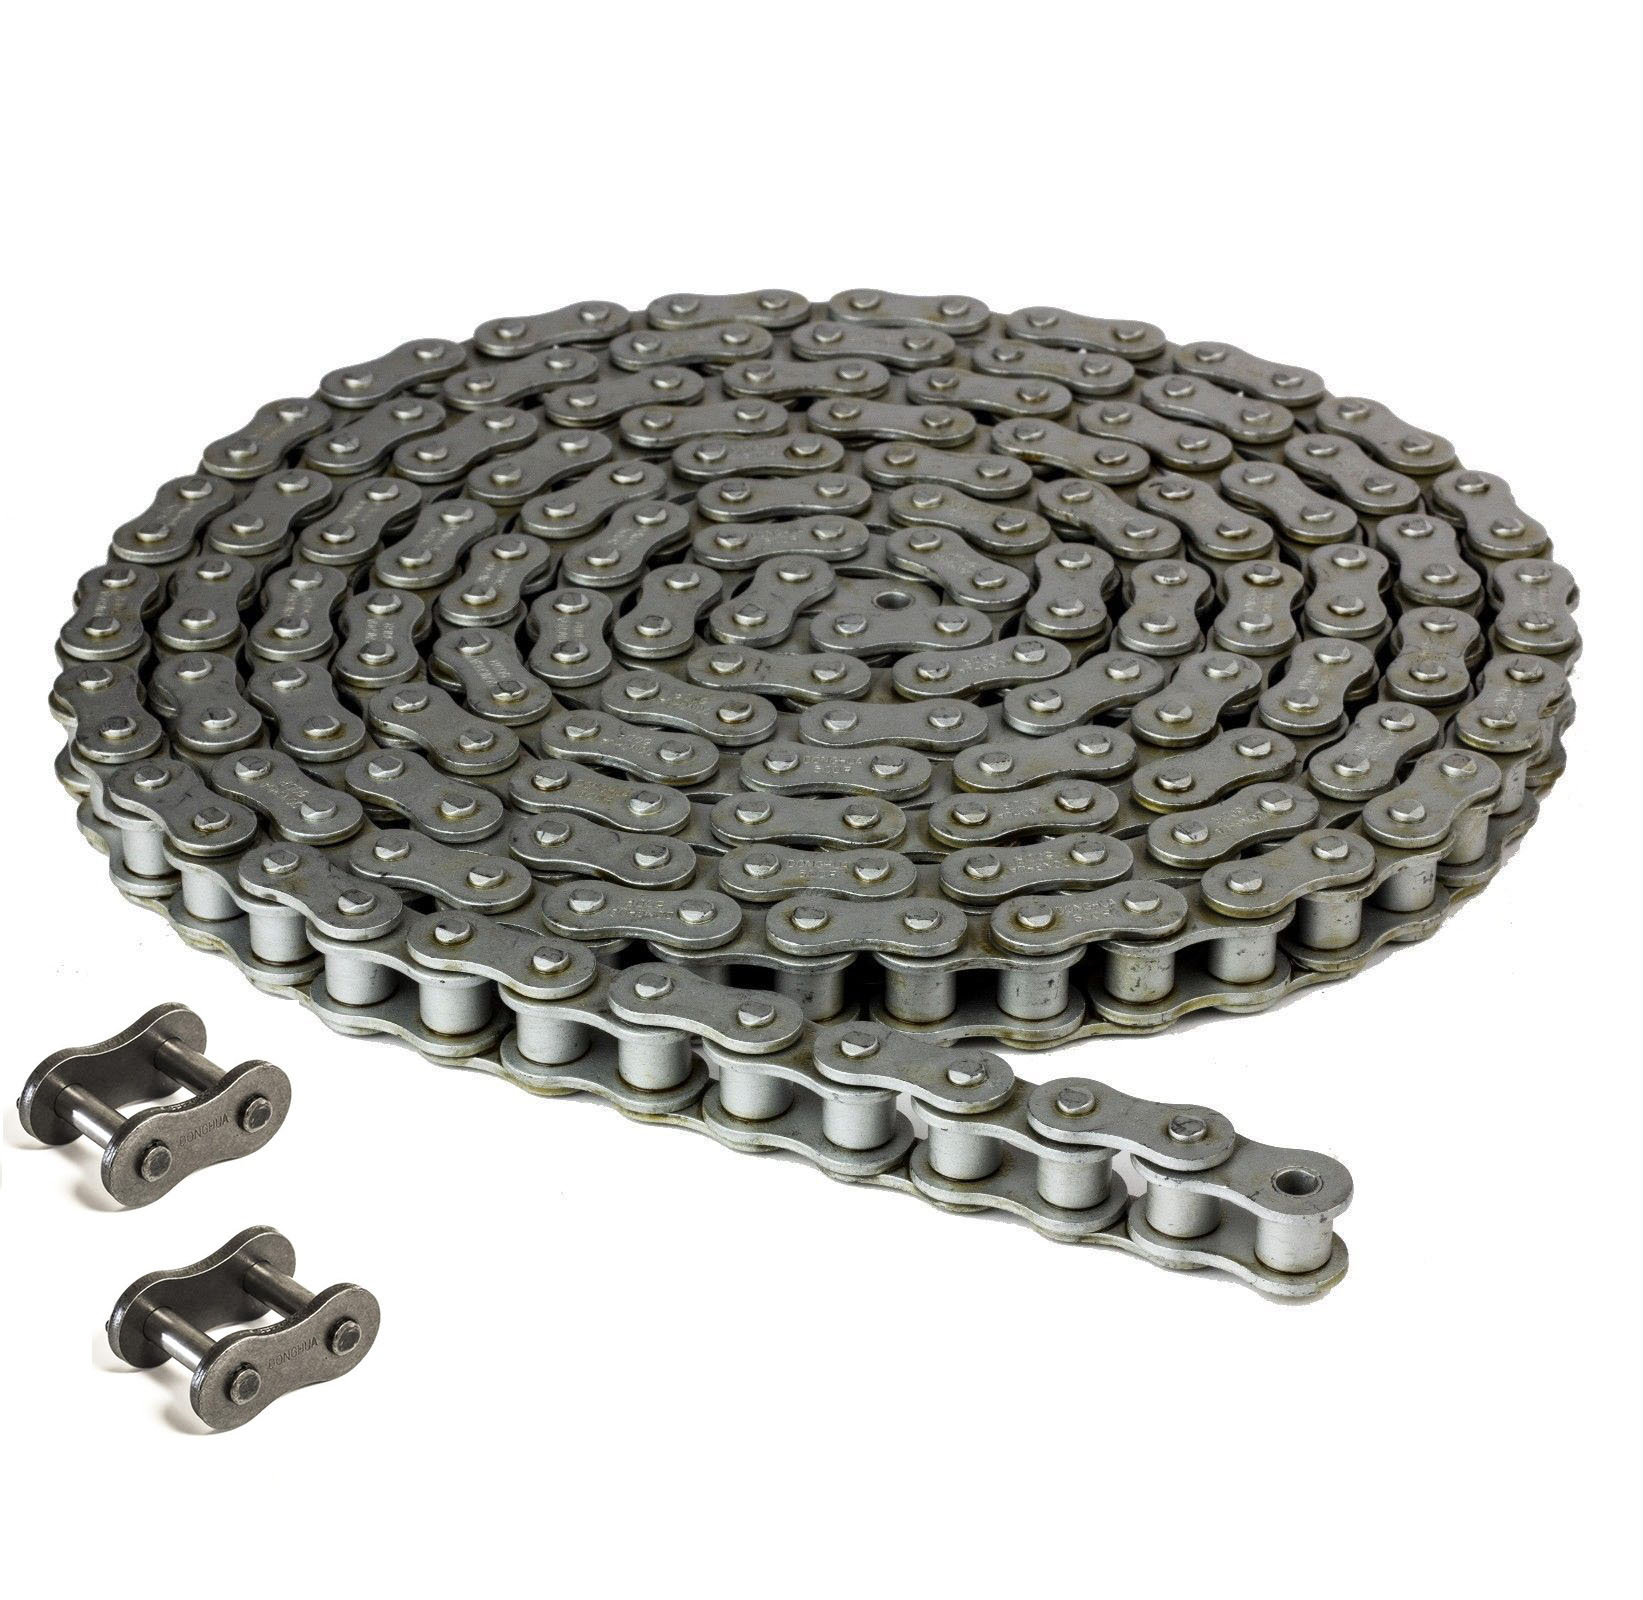 Jeremywell #50 DR Dacromet Roller Chain 10 Feet with 2 Connecting Link Corrosion Resistant